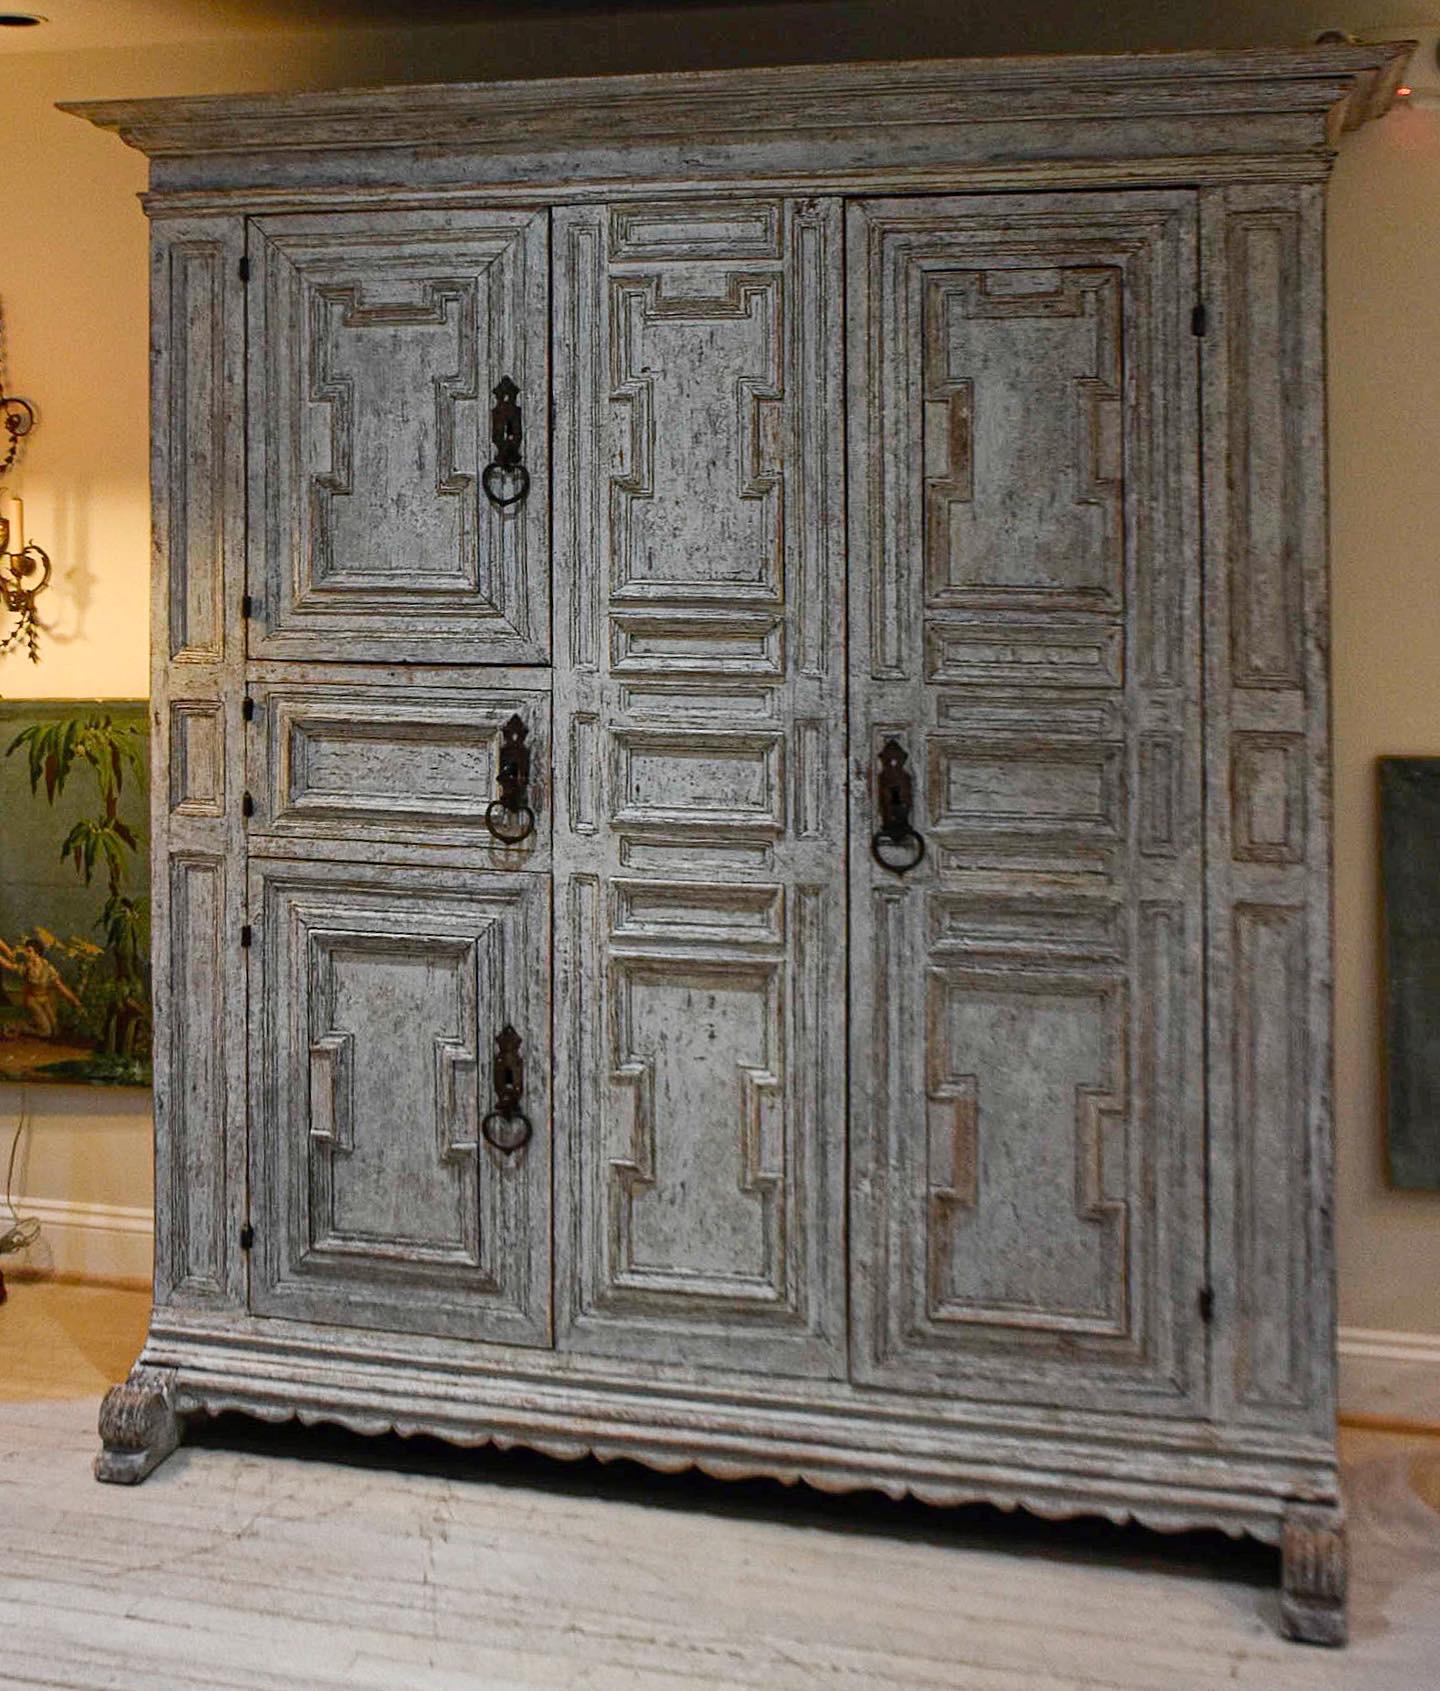 A truly stunning cabinet with a rich patina. Made by a Swedish cabinetmaker in the early 19th century.

The paint on the inside and the outside is all original. Original hardware includes the hinges, locks, key, straps. 

Intricate carved